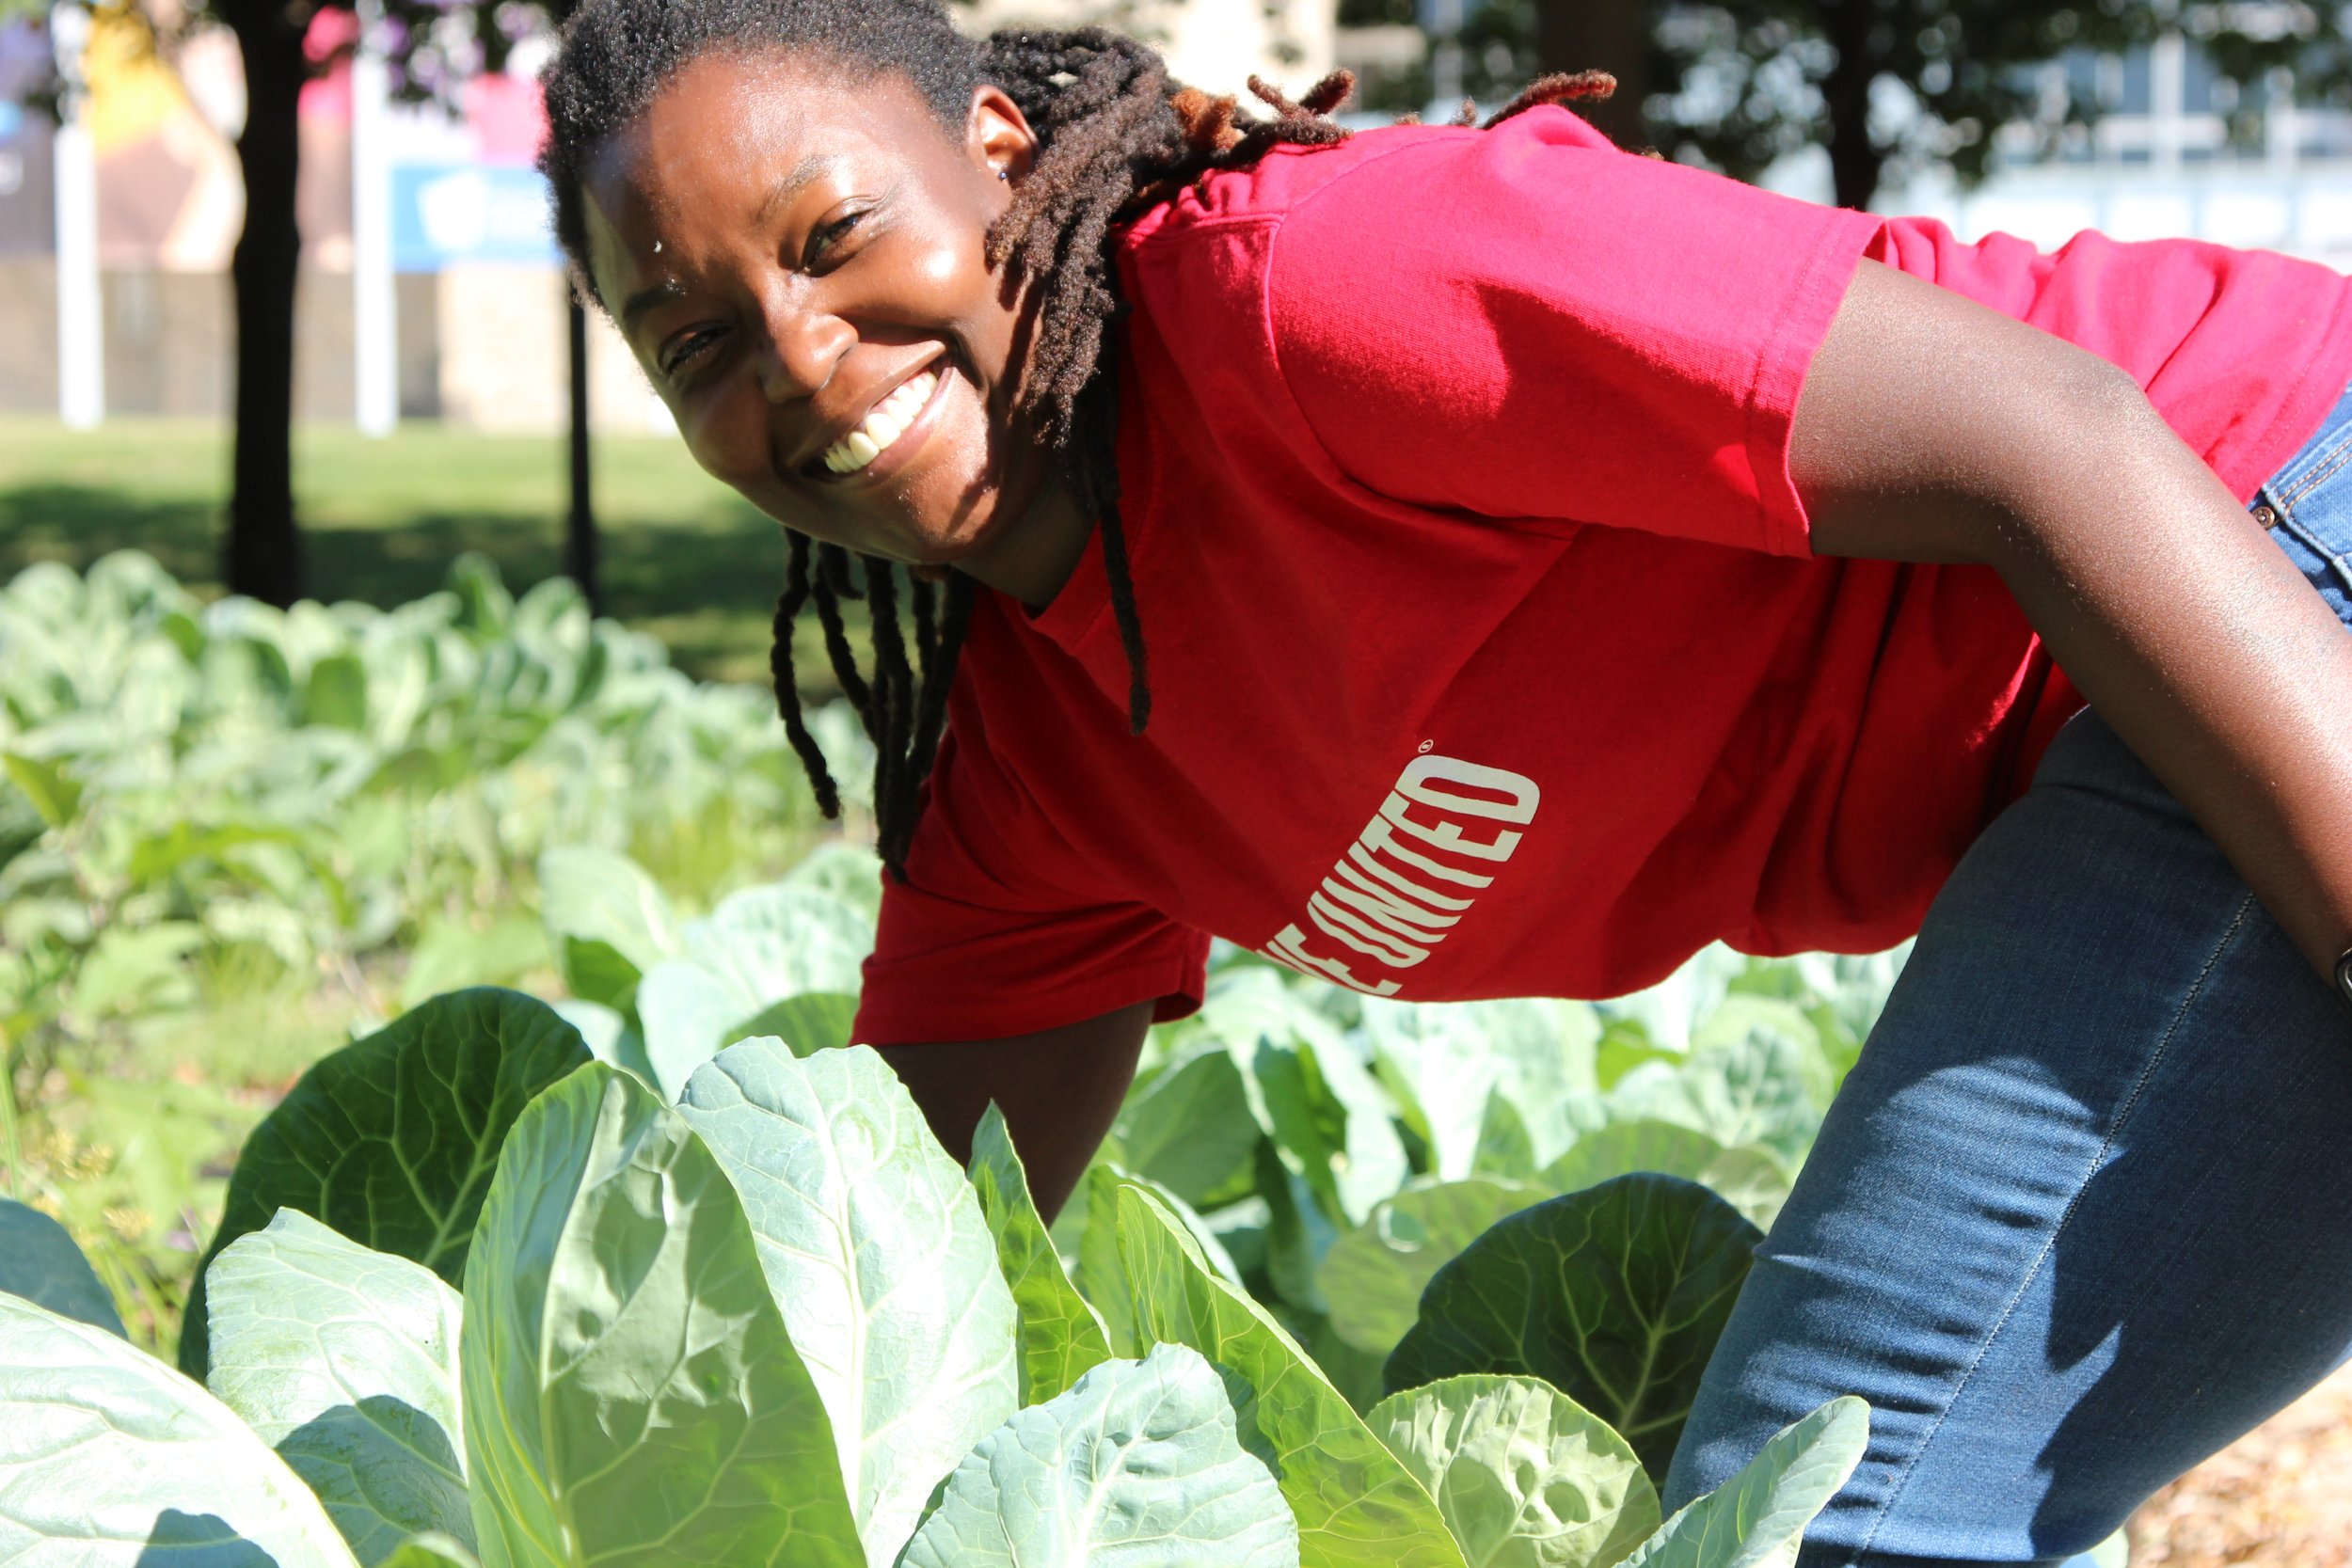  Volunteers harvest produce Sept. 9, 2021, at Growing Places Indy for United Way of Central Indiana’s first Go All IN Day. 